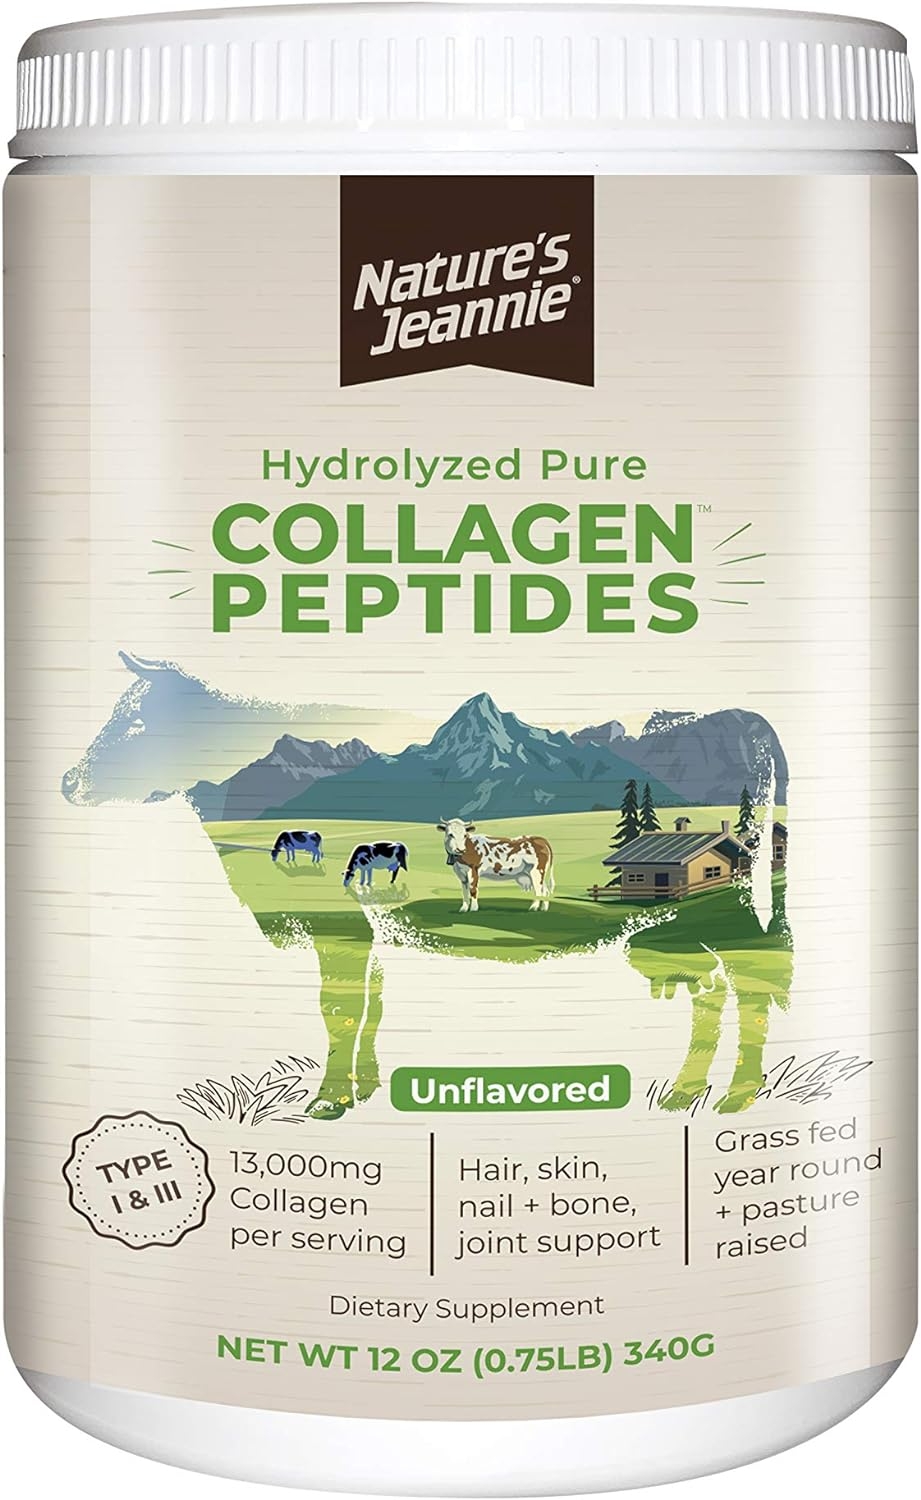 Nature's Jeannie Hydrolyzed Pure Collagen Peptides, Type I & III, Grass-fed, Paleo-Friendly, Pasture-Raised, Lab Tested, 340 Grams (1 Pack)